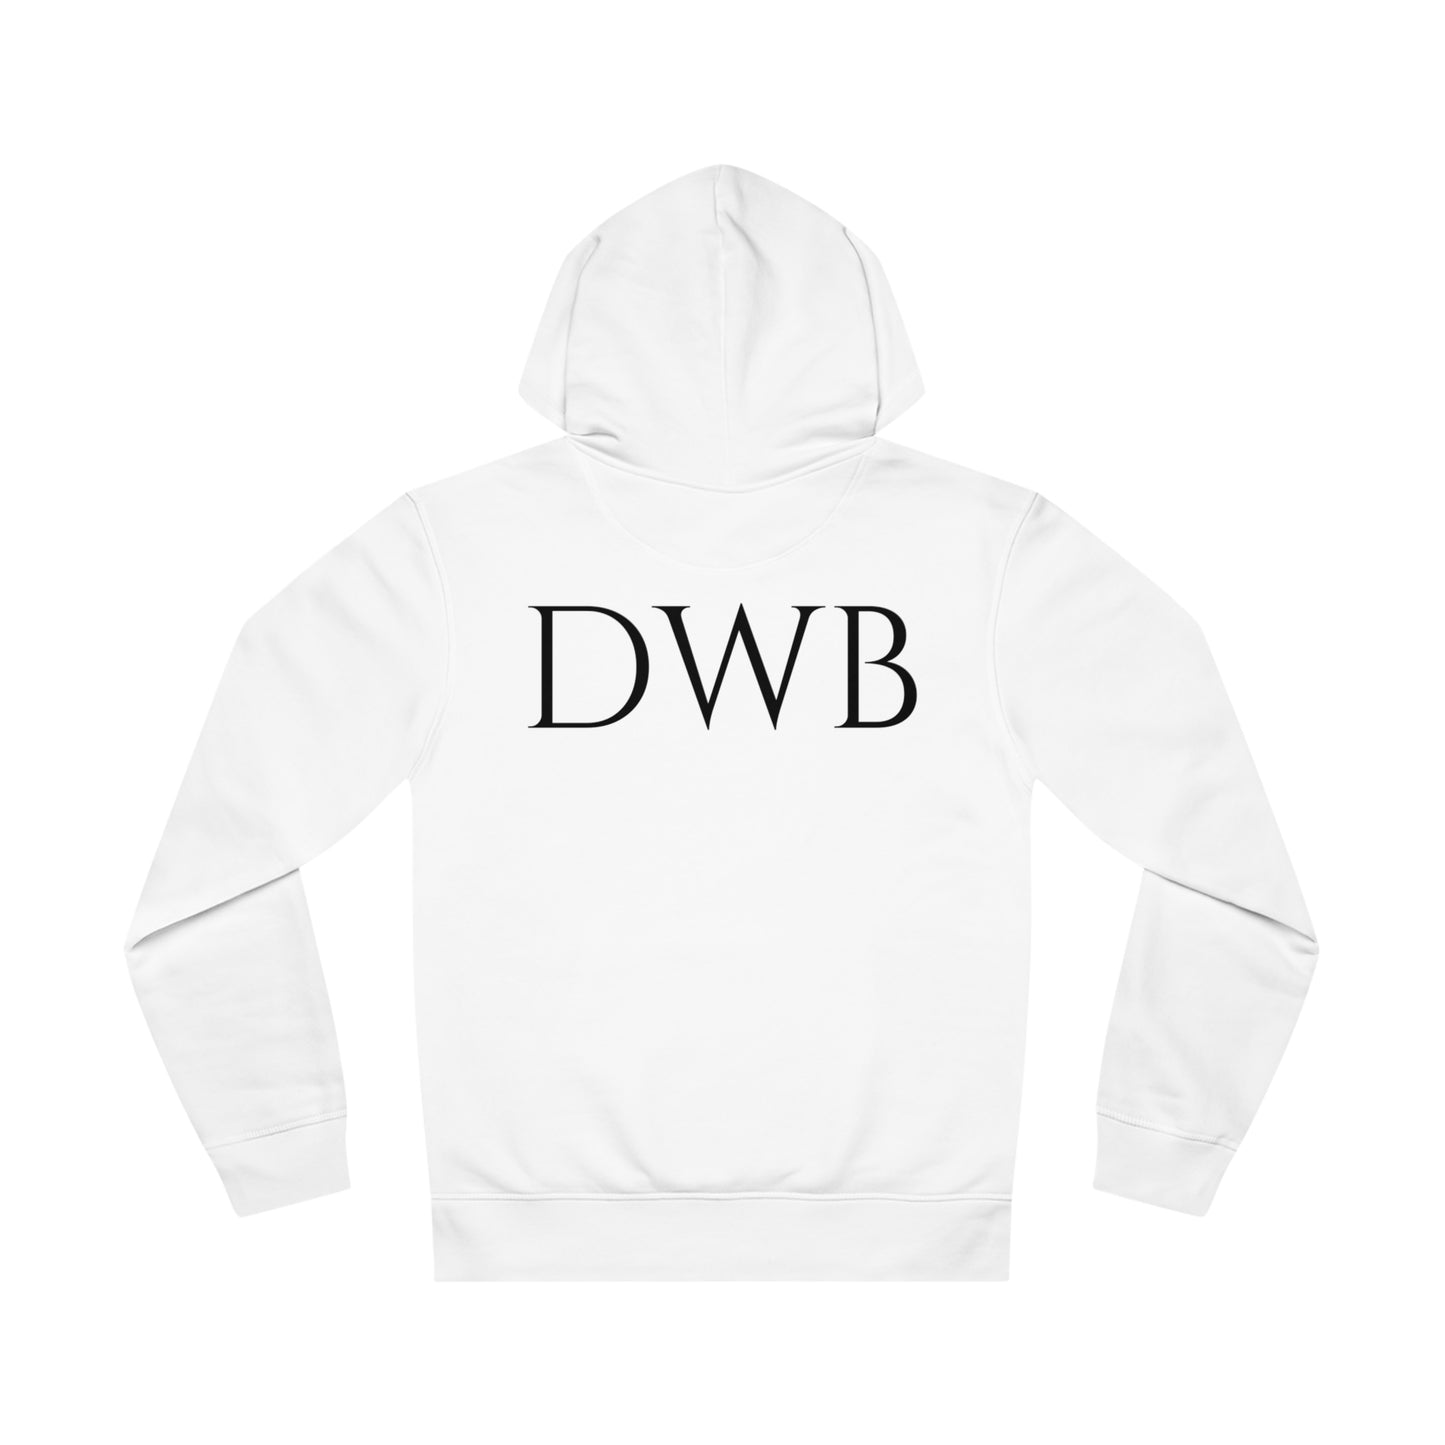 DWB Hoody (Front & Back)